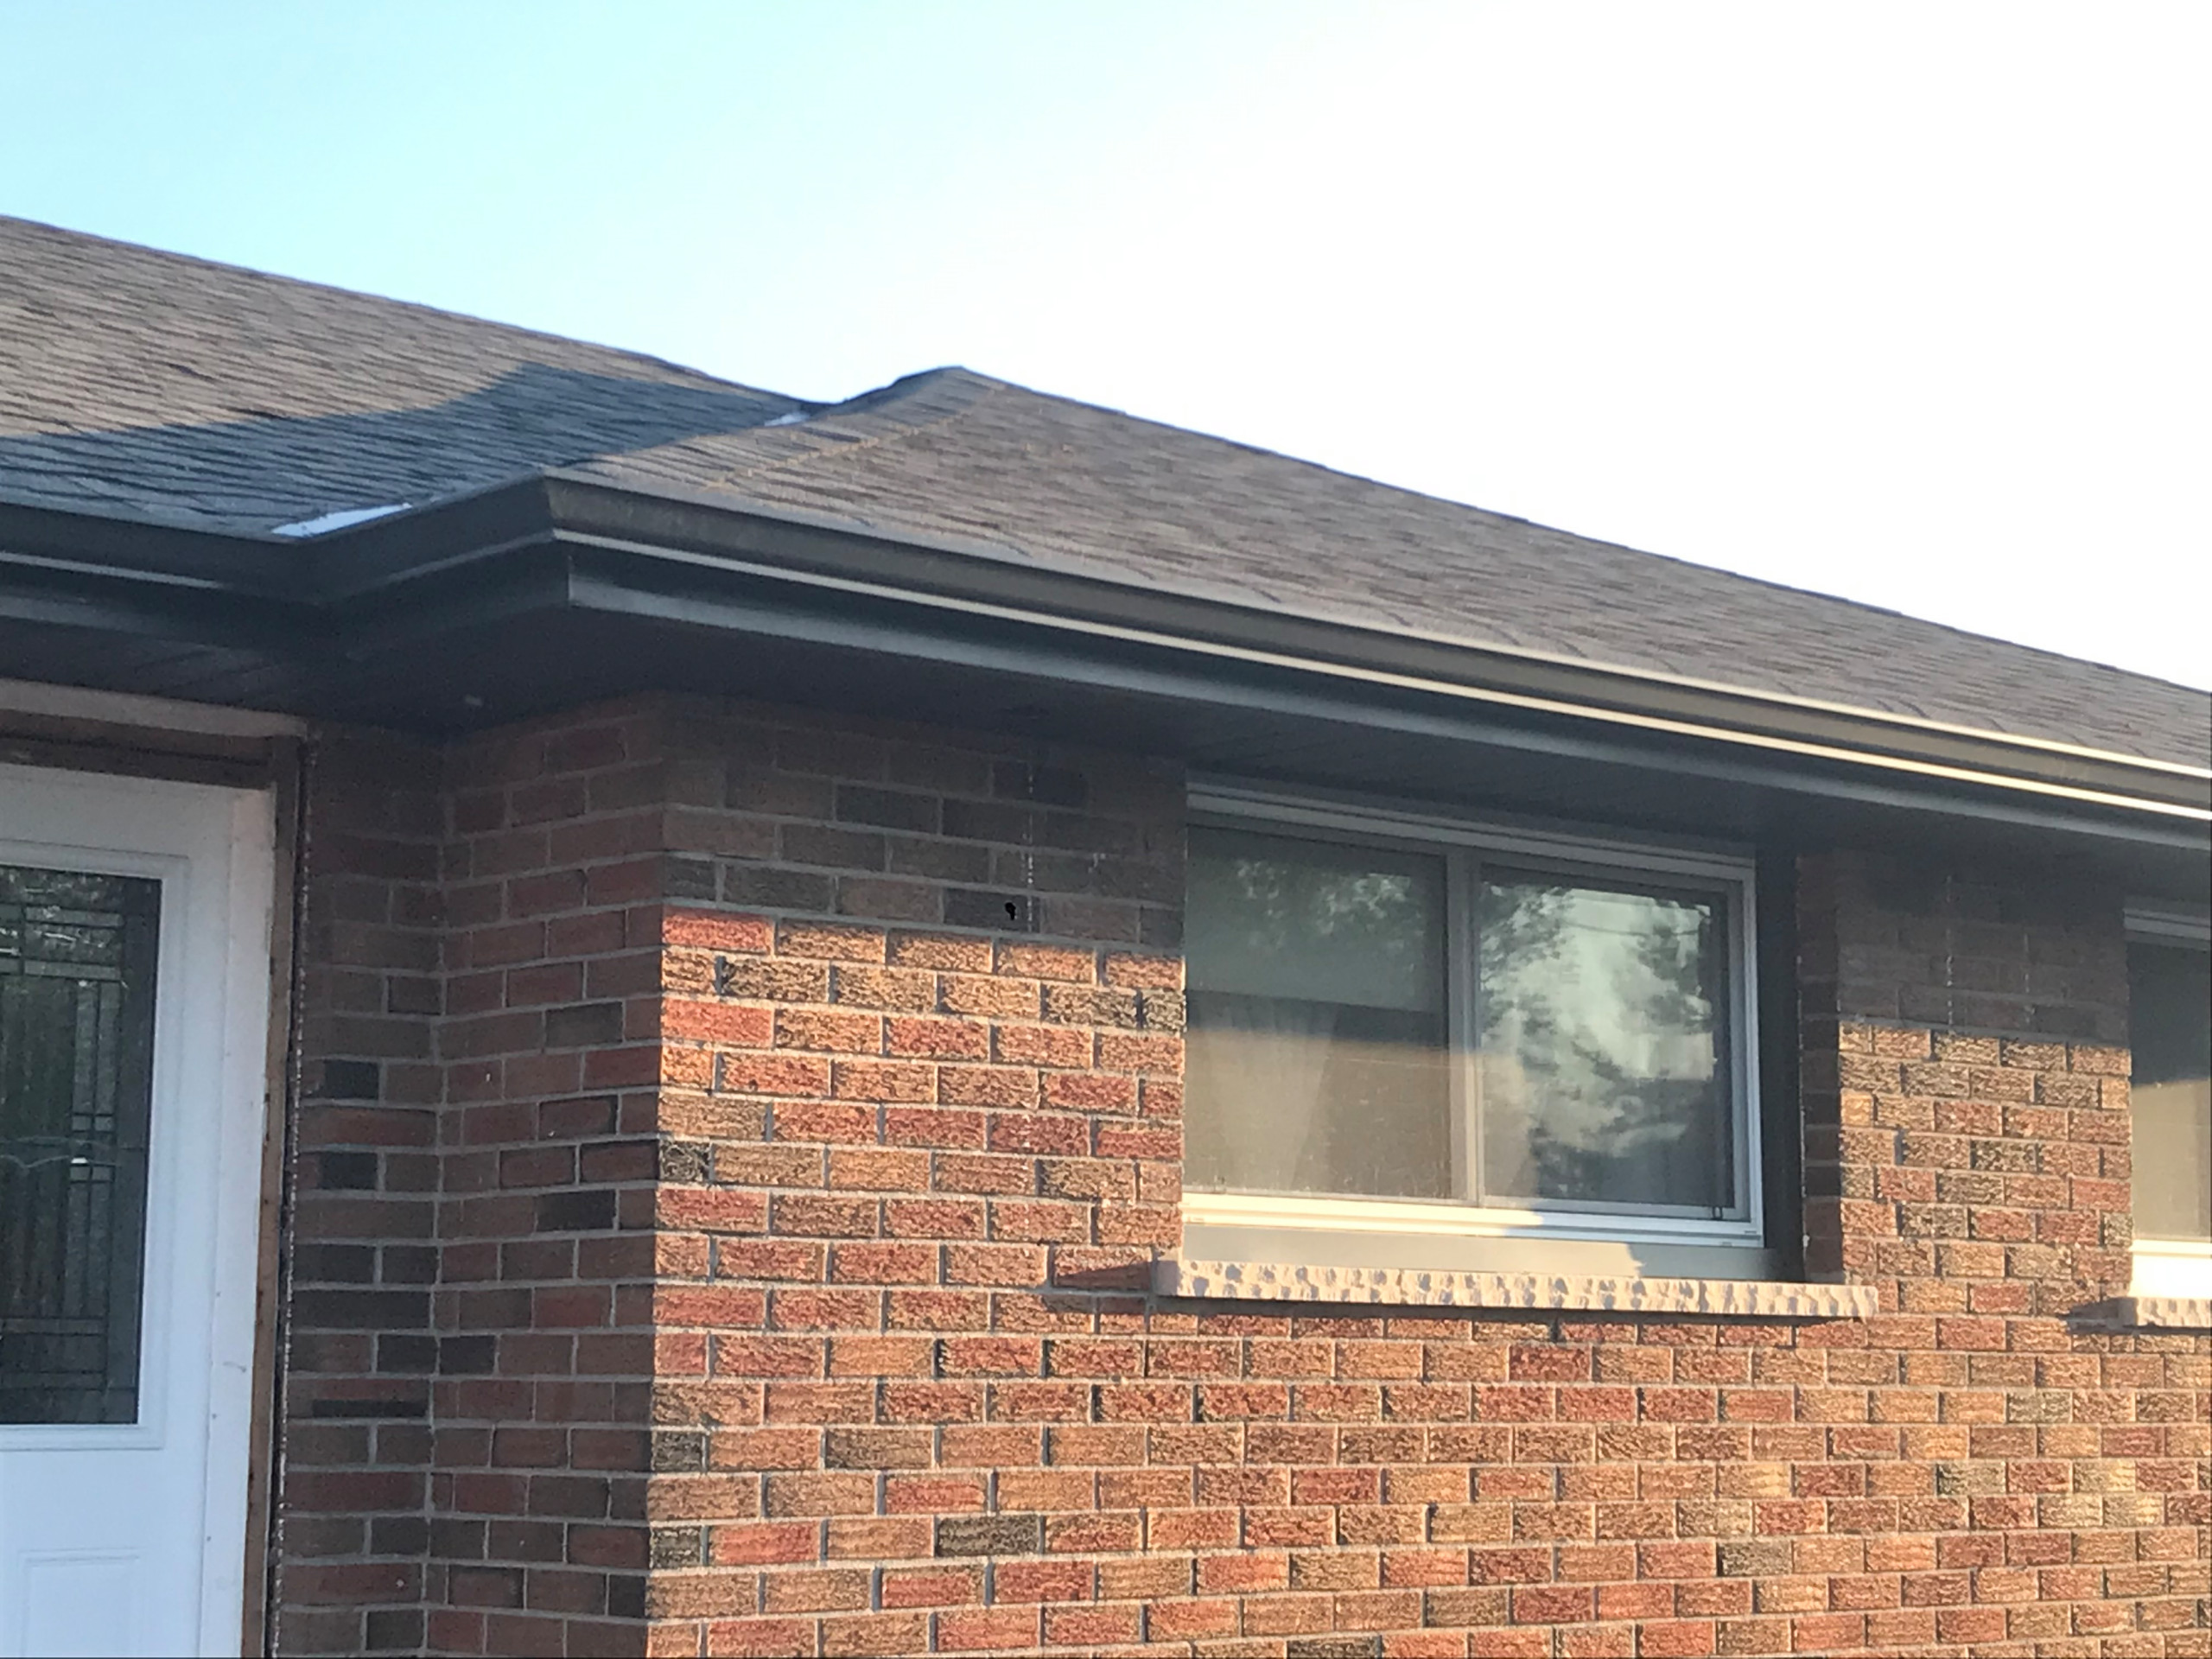 Siding, Soffit, Fascia and eavestrough